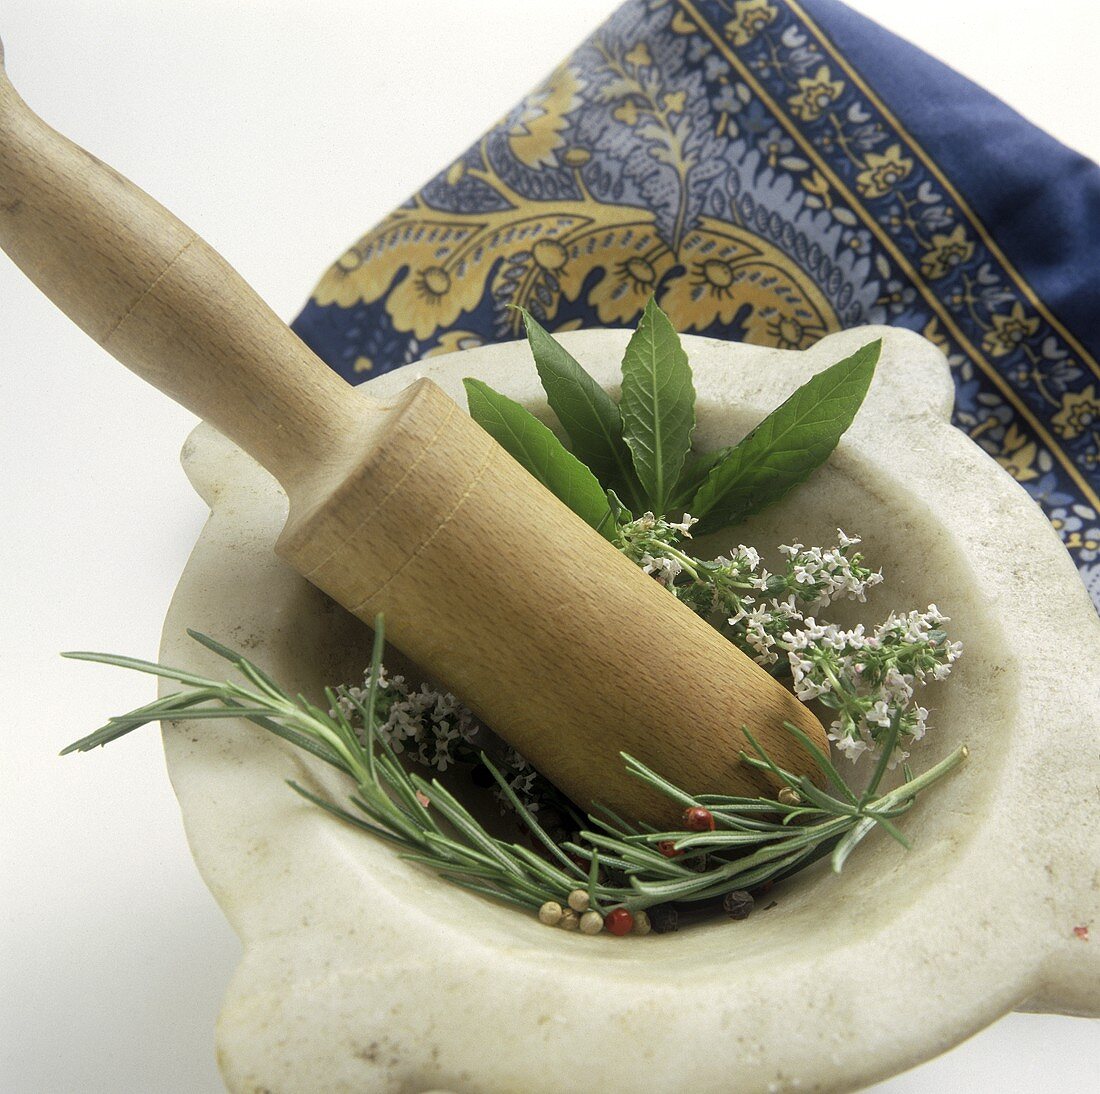 A Mortar and Pestle with Fresh Herbs